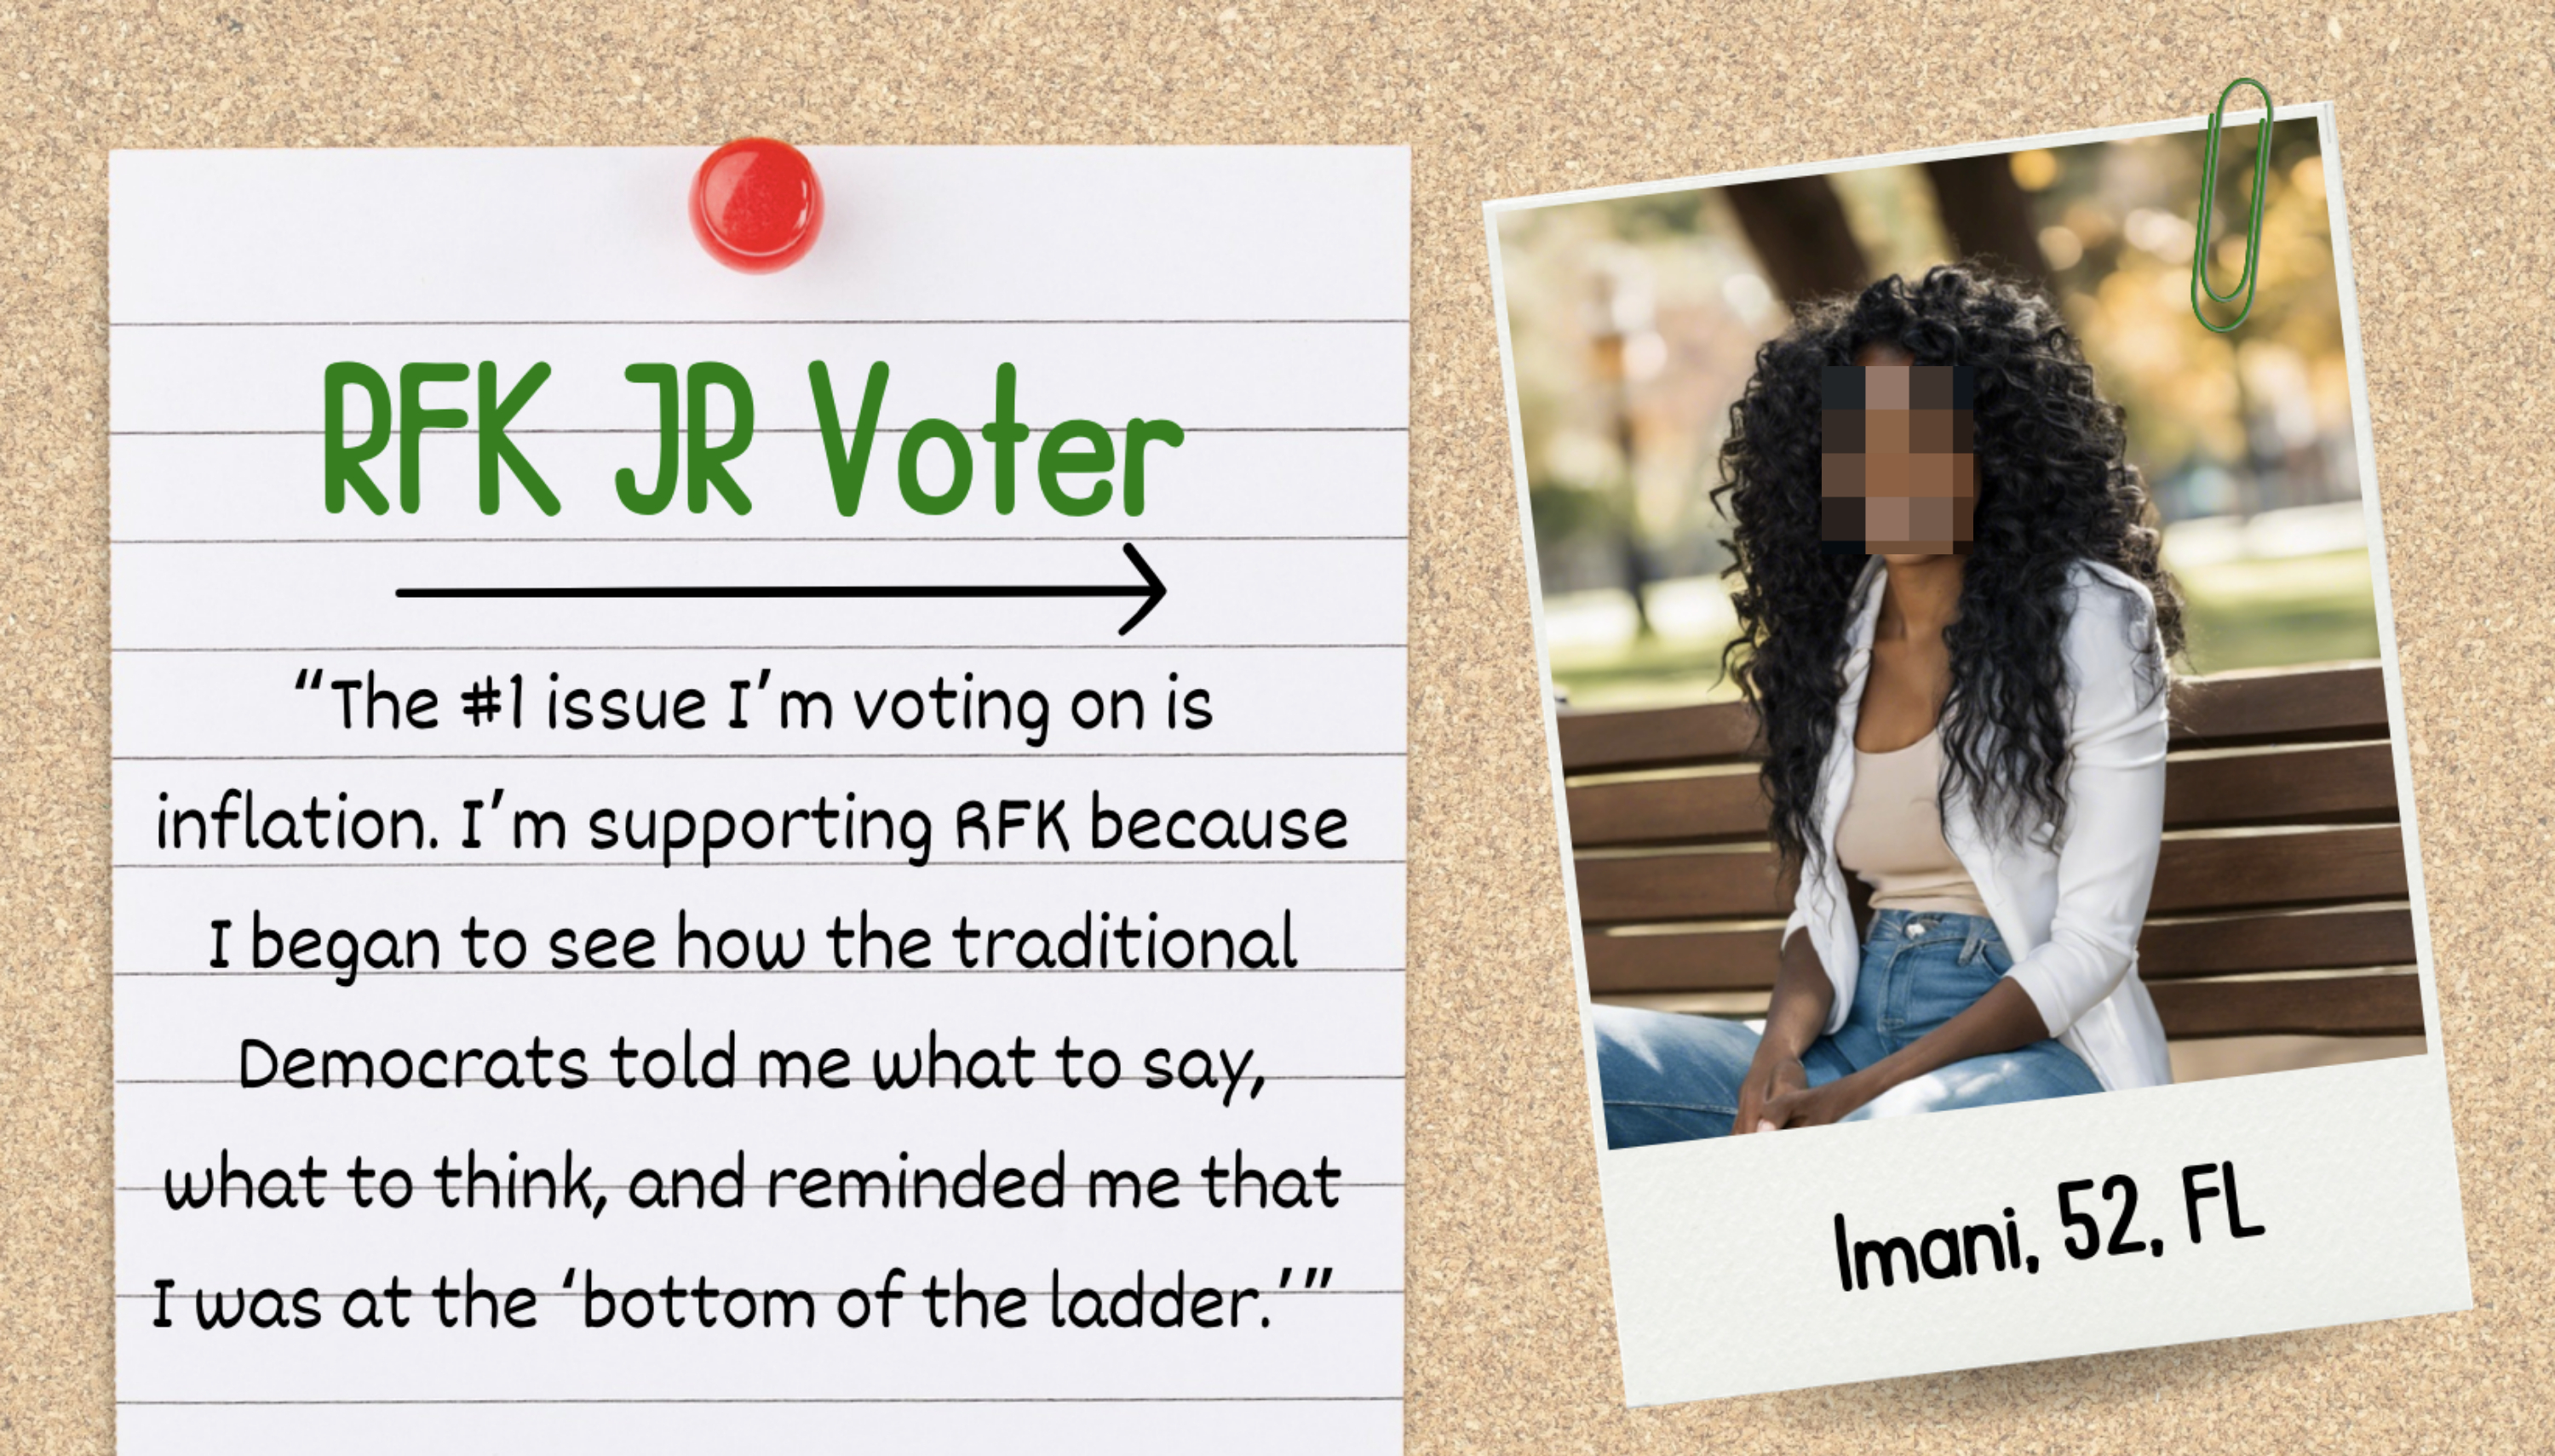 Index card reading &quot;RFK Jr Voter&quot; and &quot;The #1 issue I&#x27;m voting on is inflation.&quot; Polaroid photo of Imani, 52, FL, seated outdoors, paper-clipped to the index card